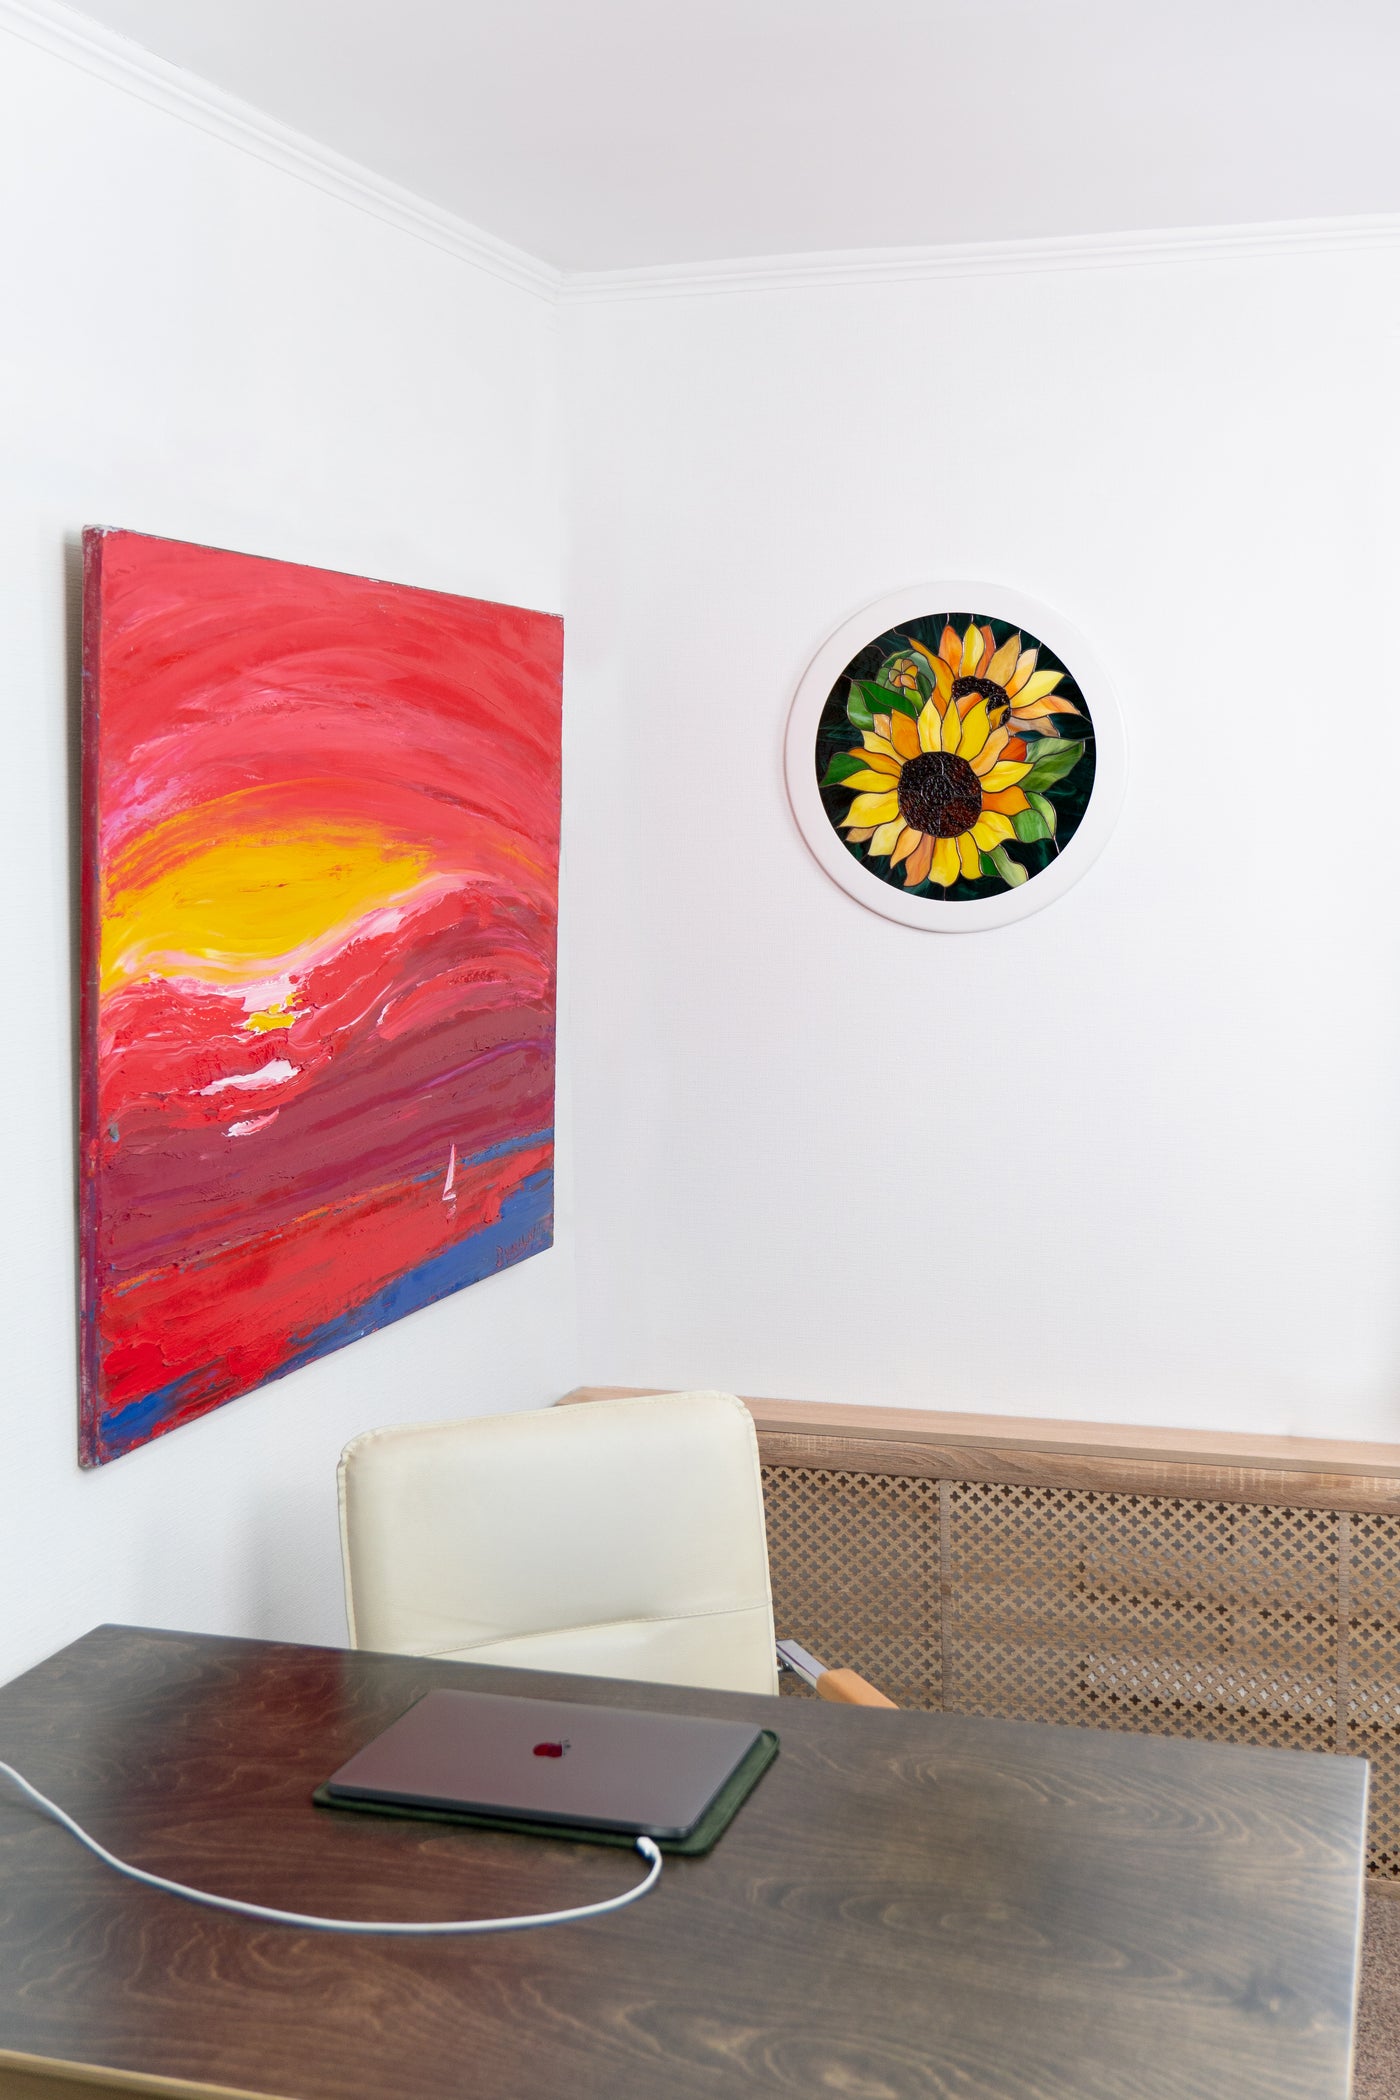 Round stained glass panel predicting sunflowers on the wall